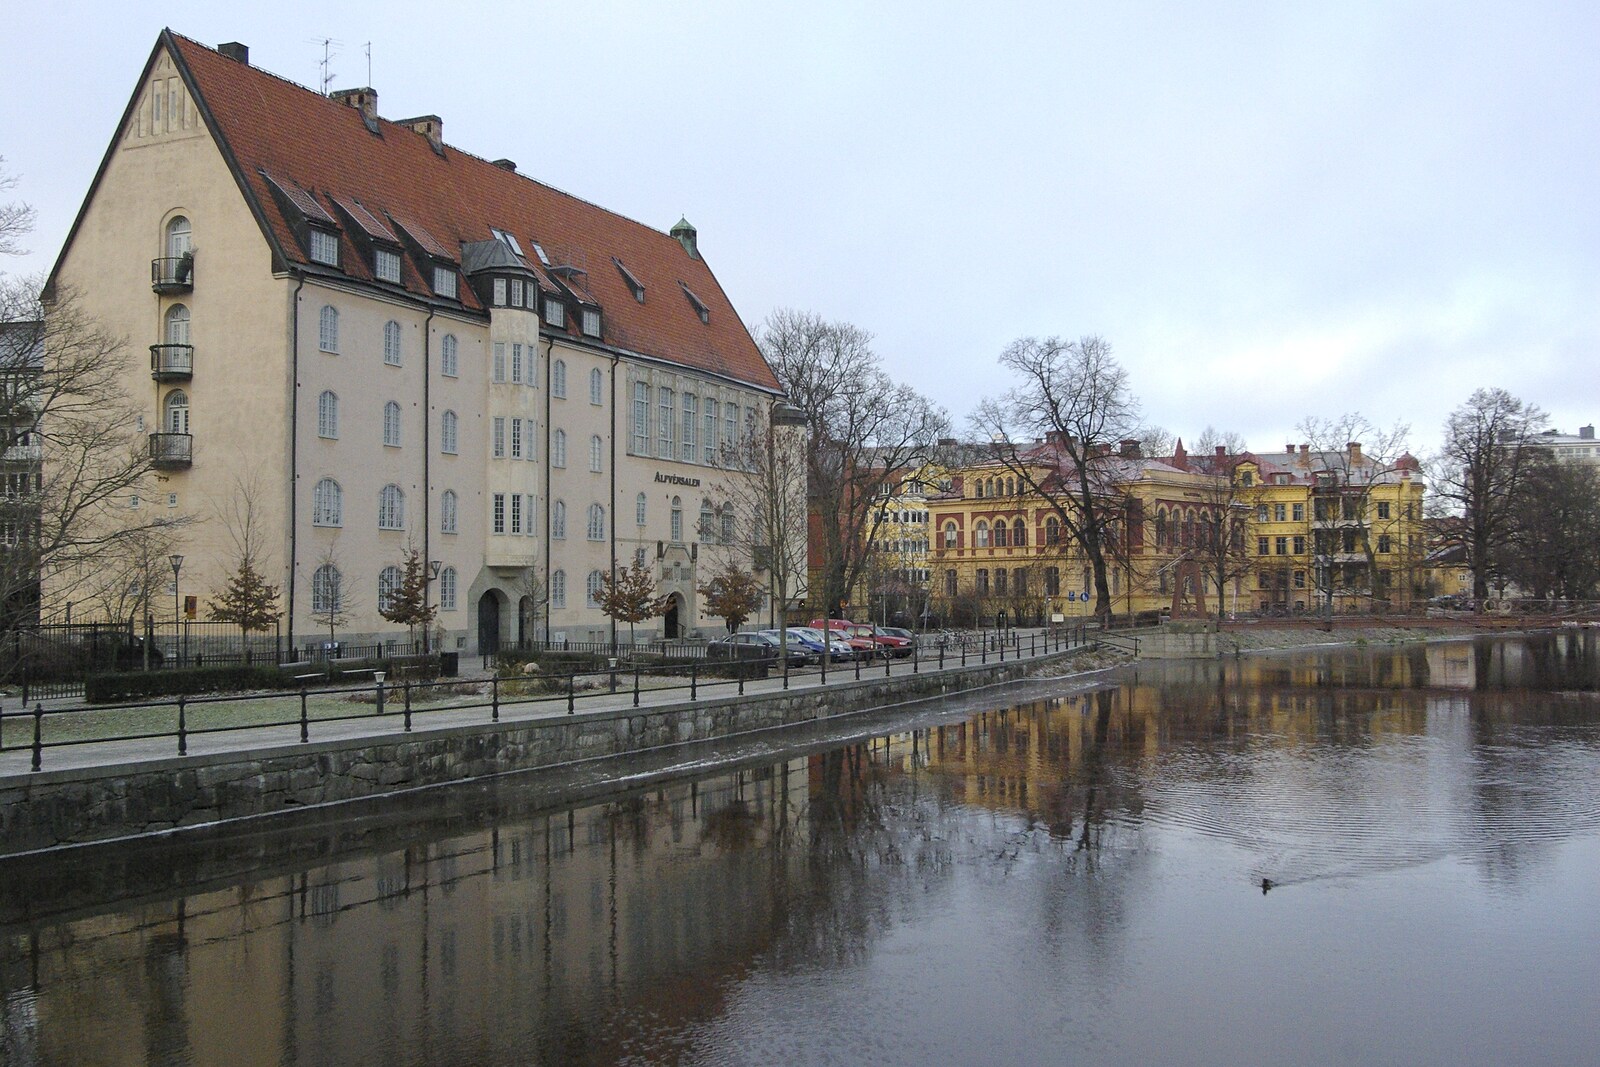 More old buildings on the river from Gamla Uppsala, Uppsala County, Sweden - 16th December 2007